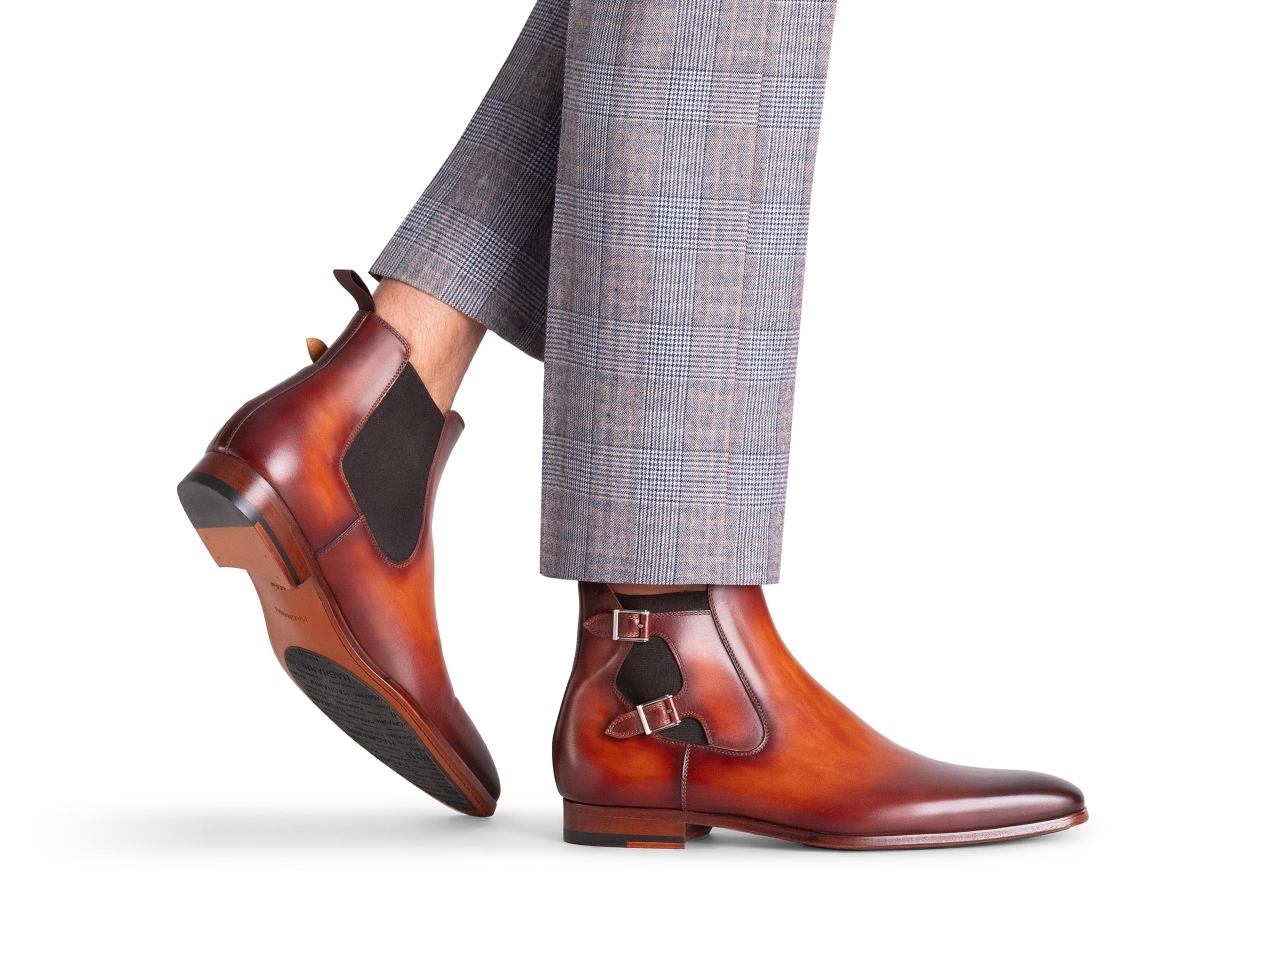 The Caspe Cognac pairs well with grey pants